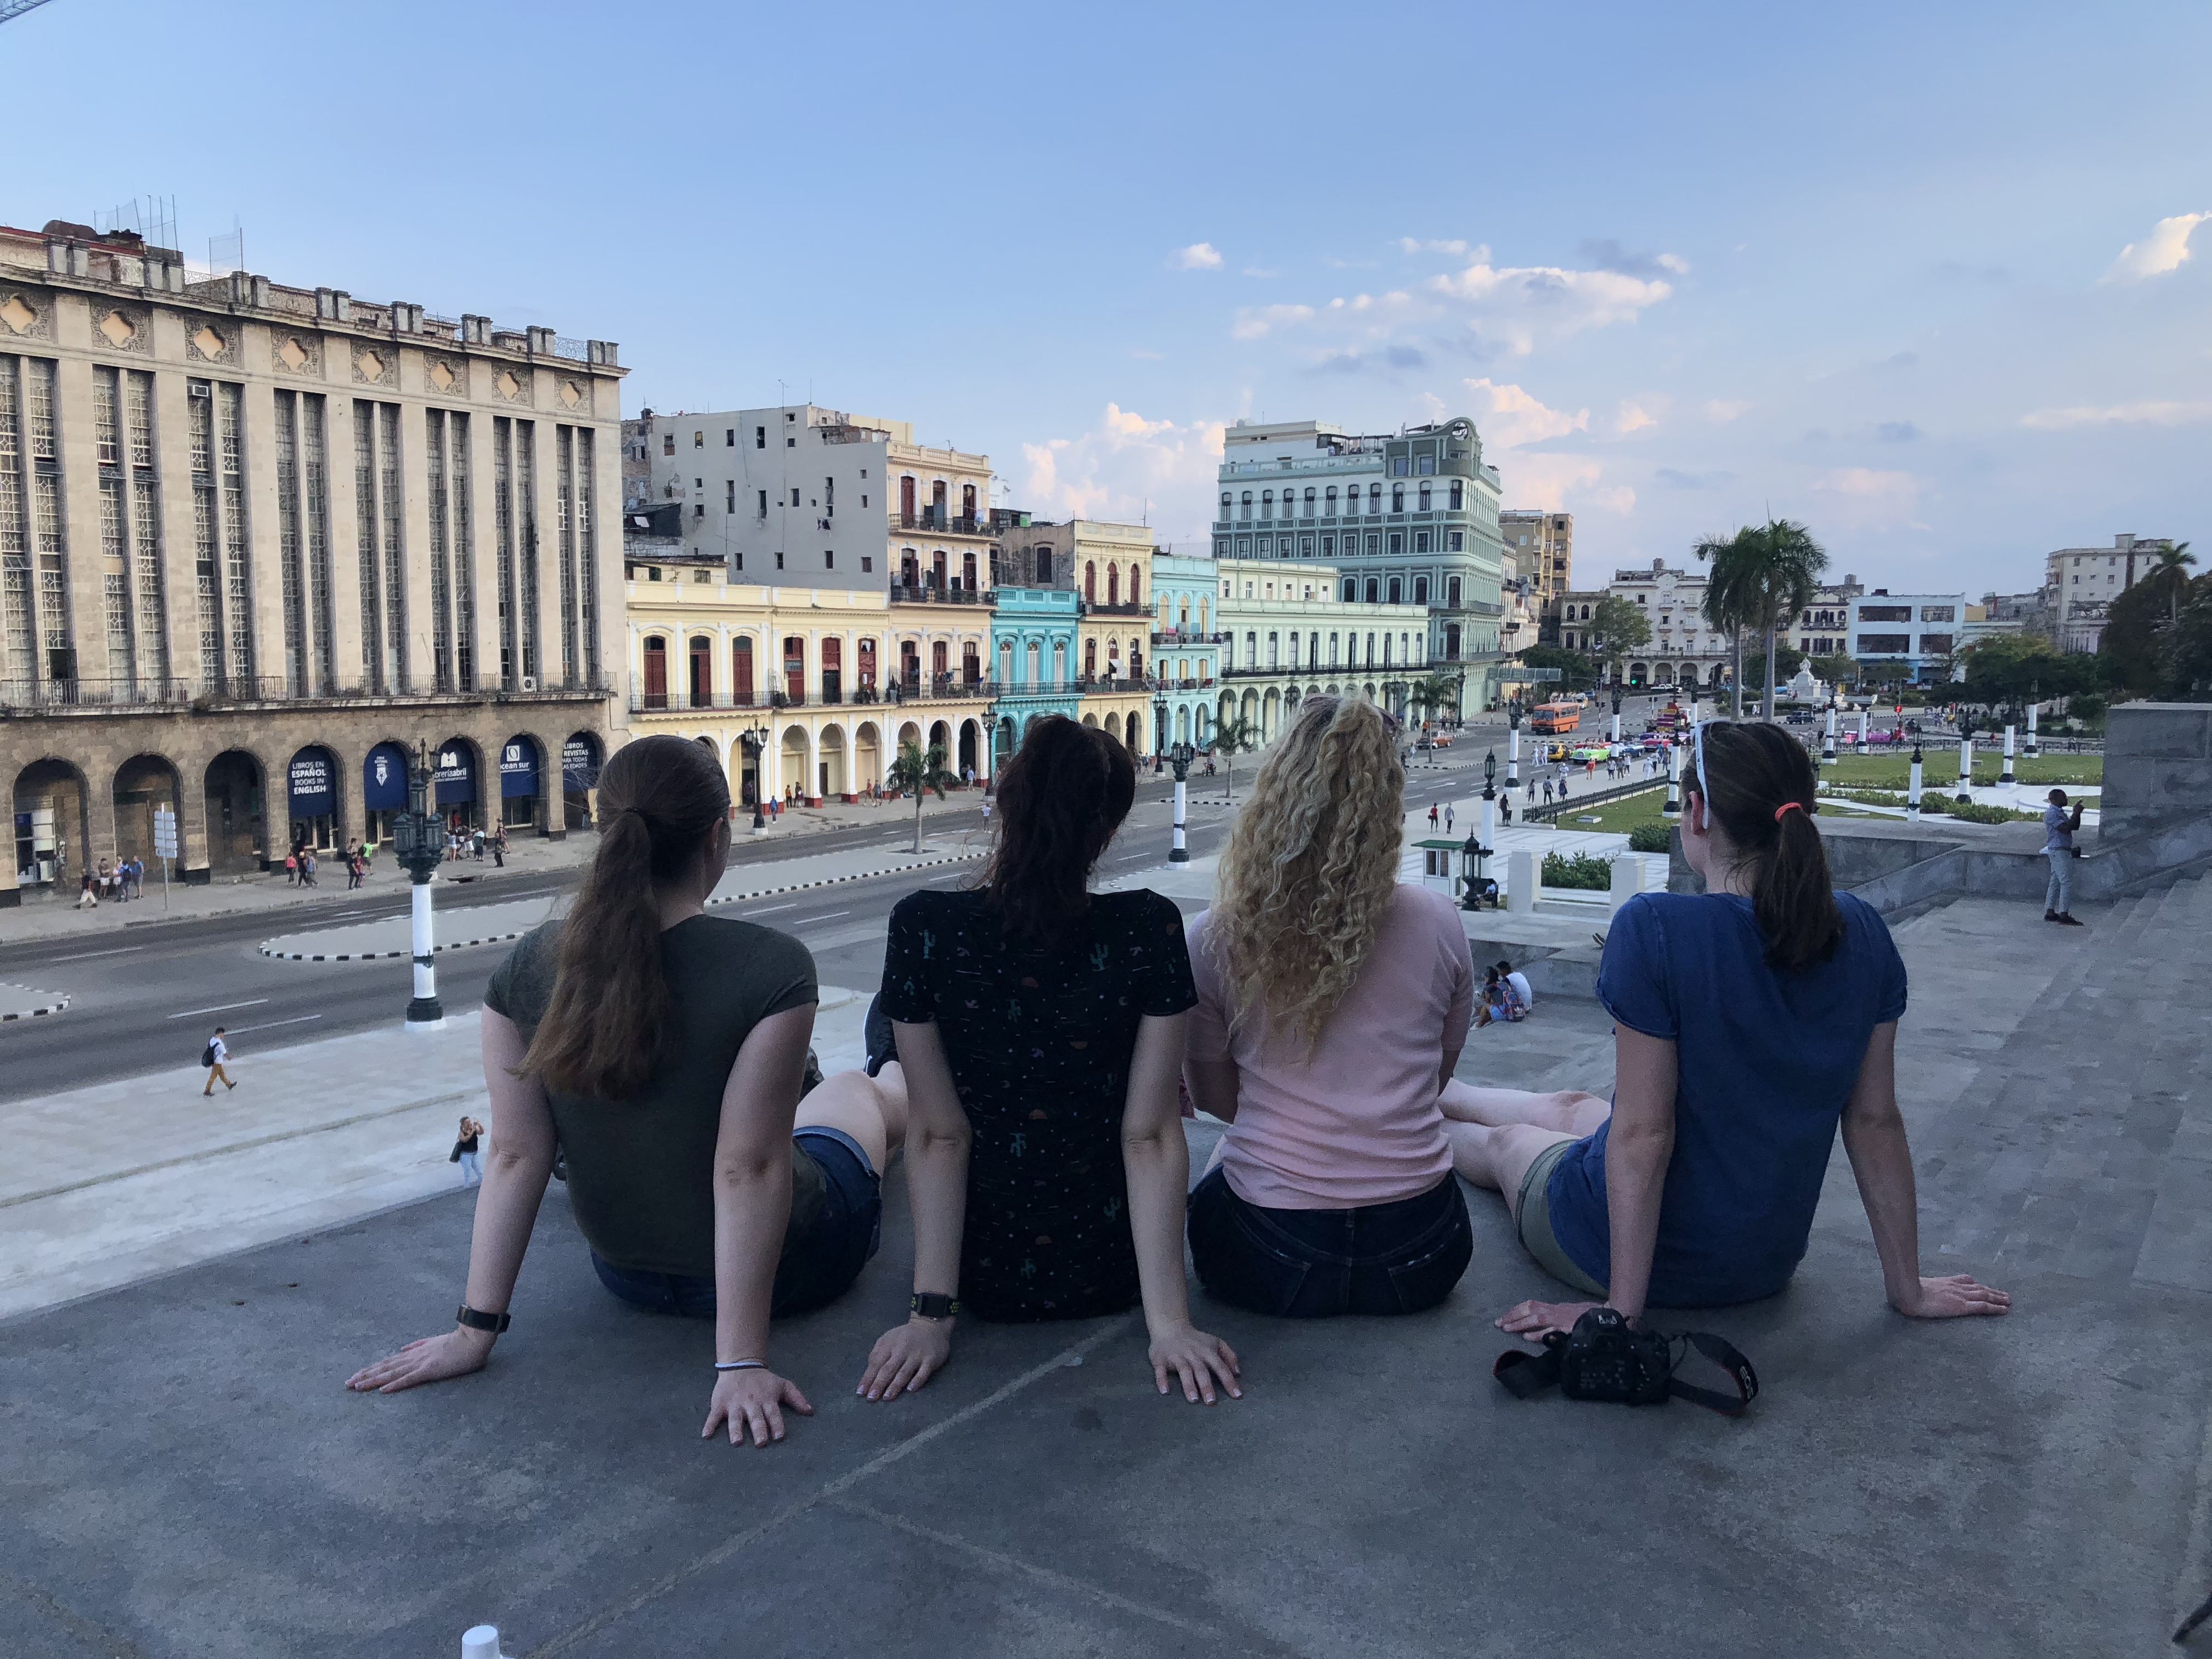 Honors students sit with their back to the camera on the steps of Cuba's capital building as they look out at the city.